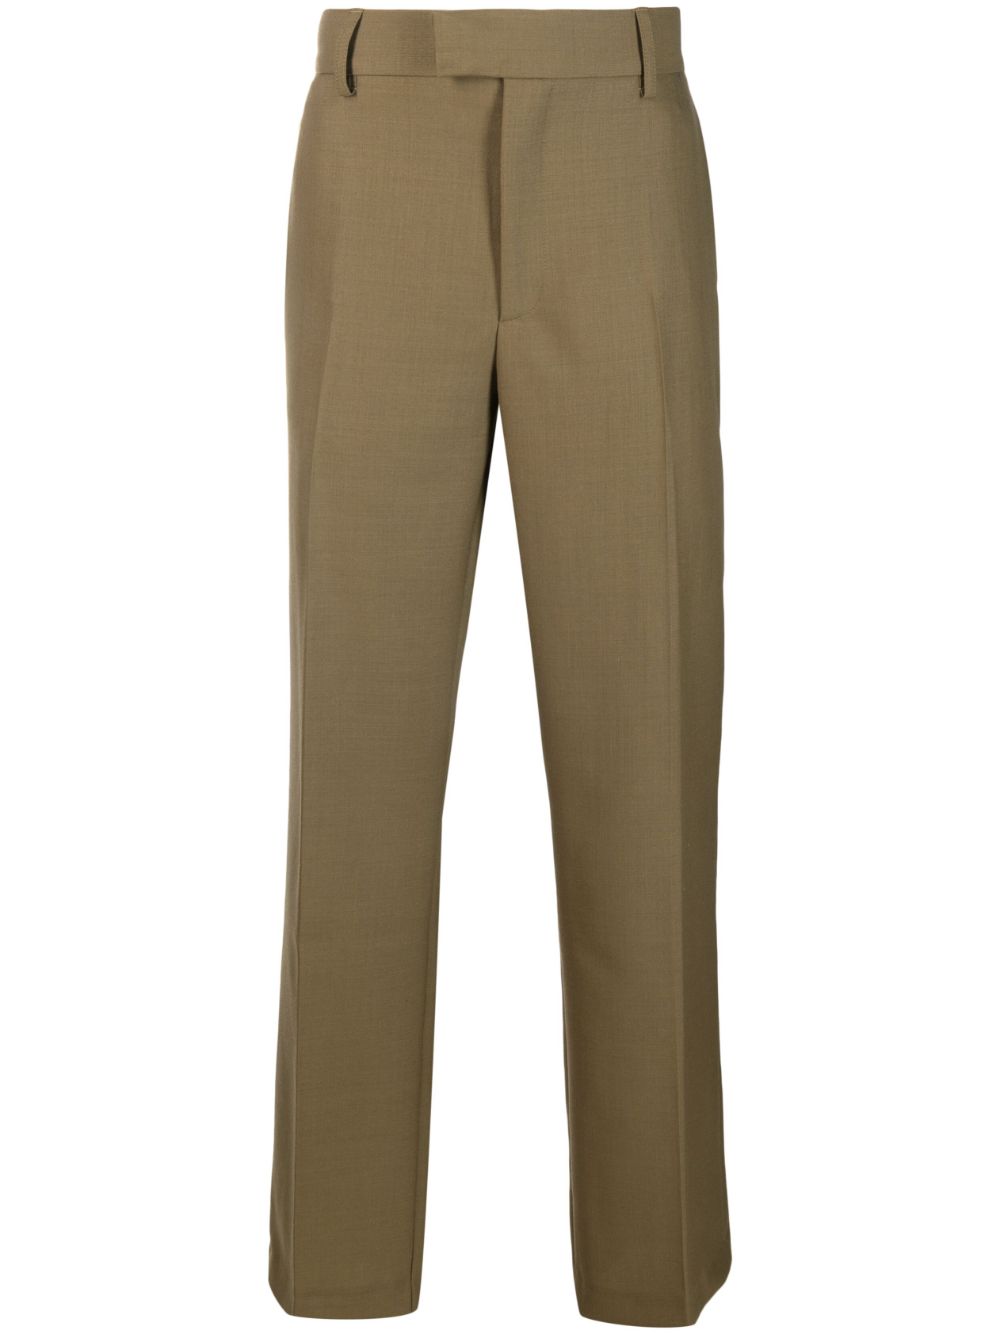 SÉFR Mike Straight-Leg Twill Suit Trousers for Men